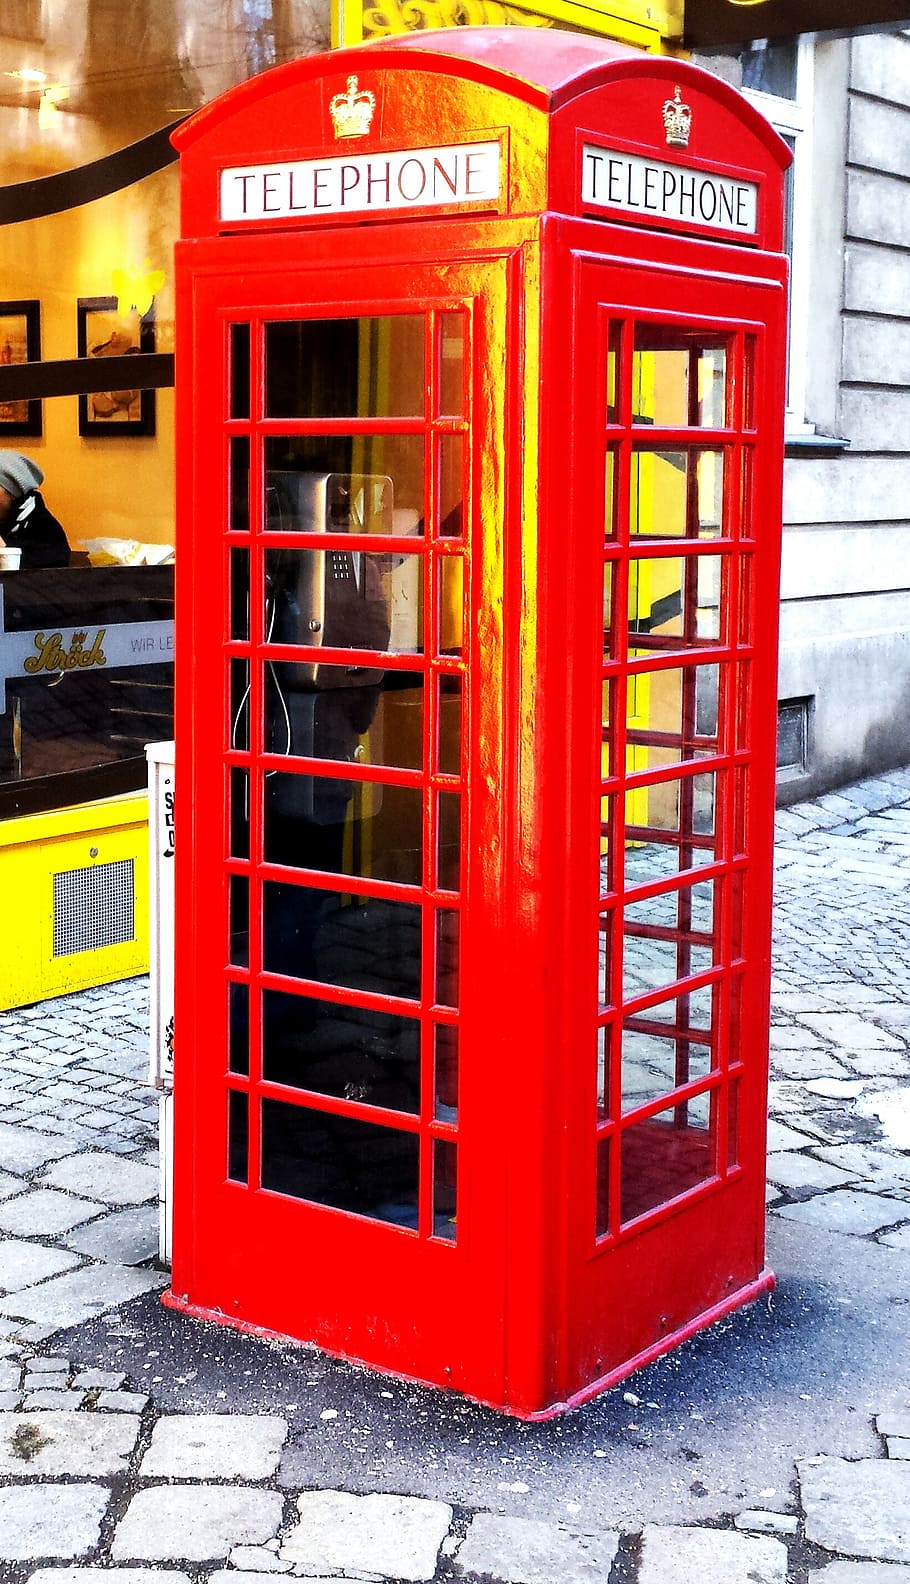 phone booth, mobile phone, old, dispensary, telephone, communication